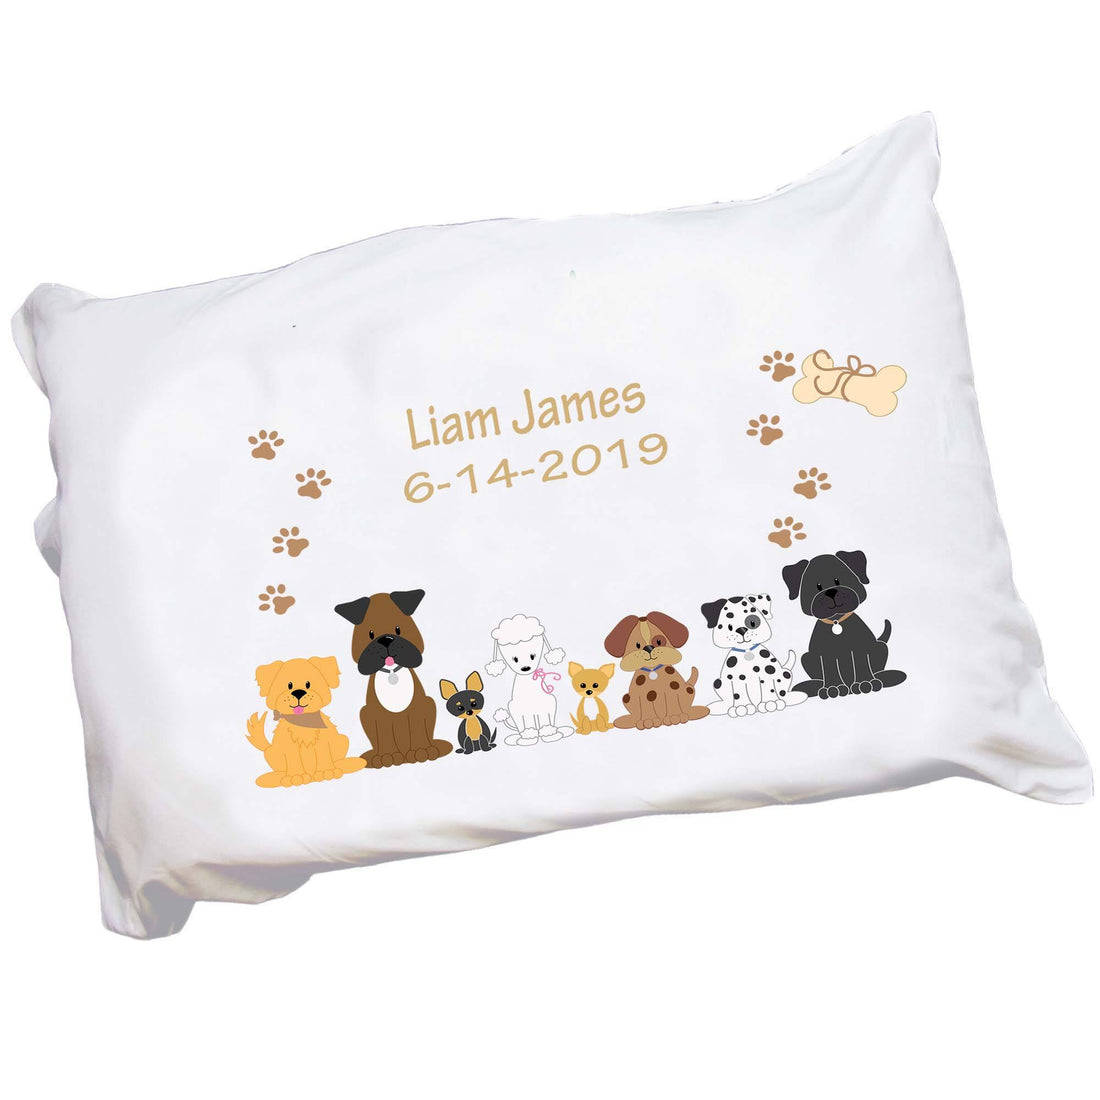 Personalized Childrens Pillowcase with Brown Dogs design